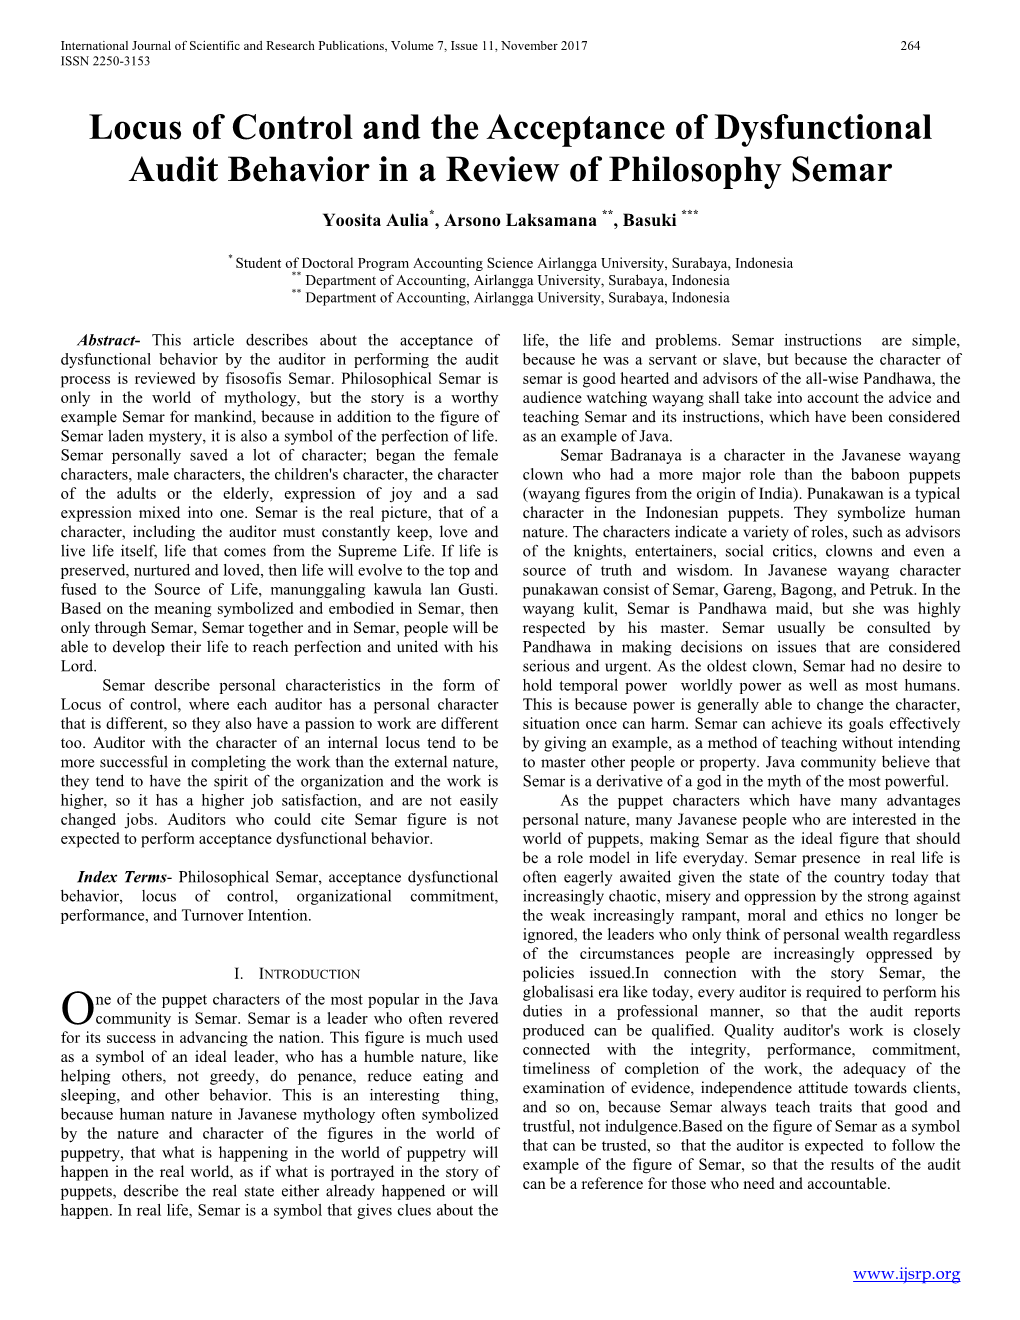 Locus of Control and the Acceptance of Dysfunctional Audit Behavior in a Review of Philosophy Semar